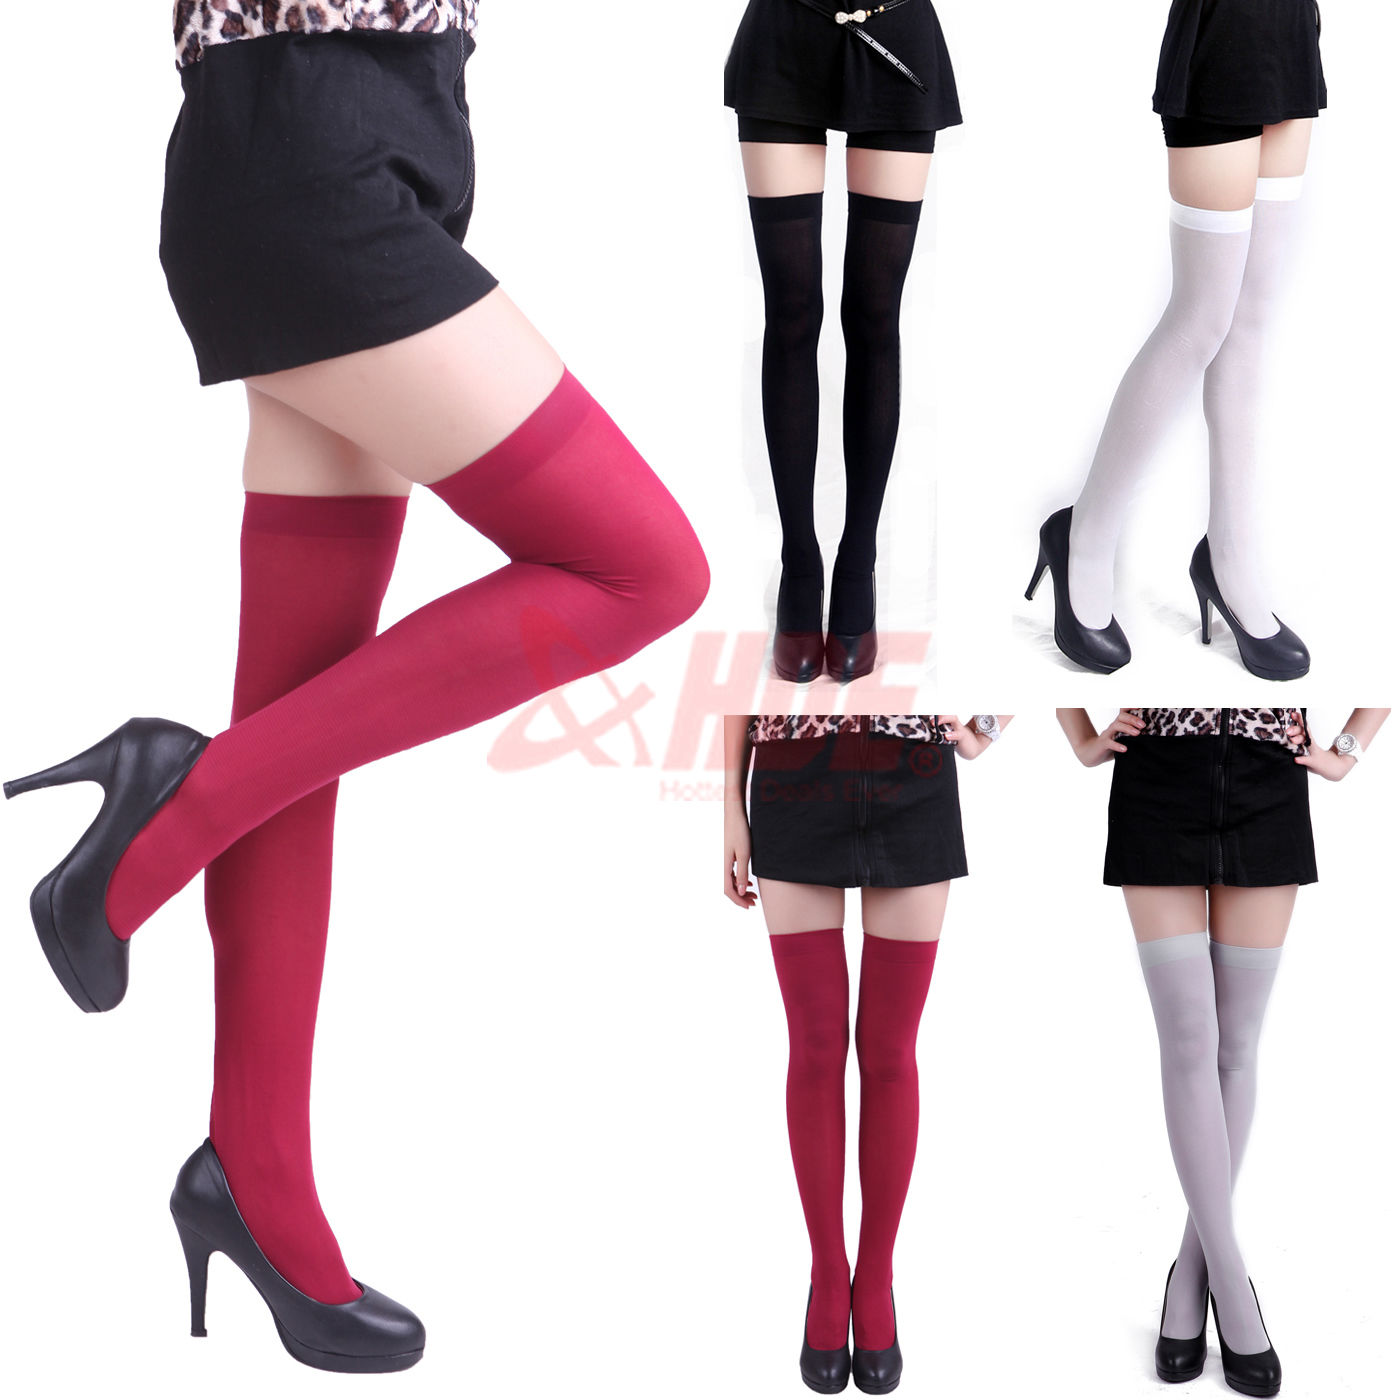 Sexy Womens Lady Girls Fashion Opaque Knit Over Knee Thigh High Stockings